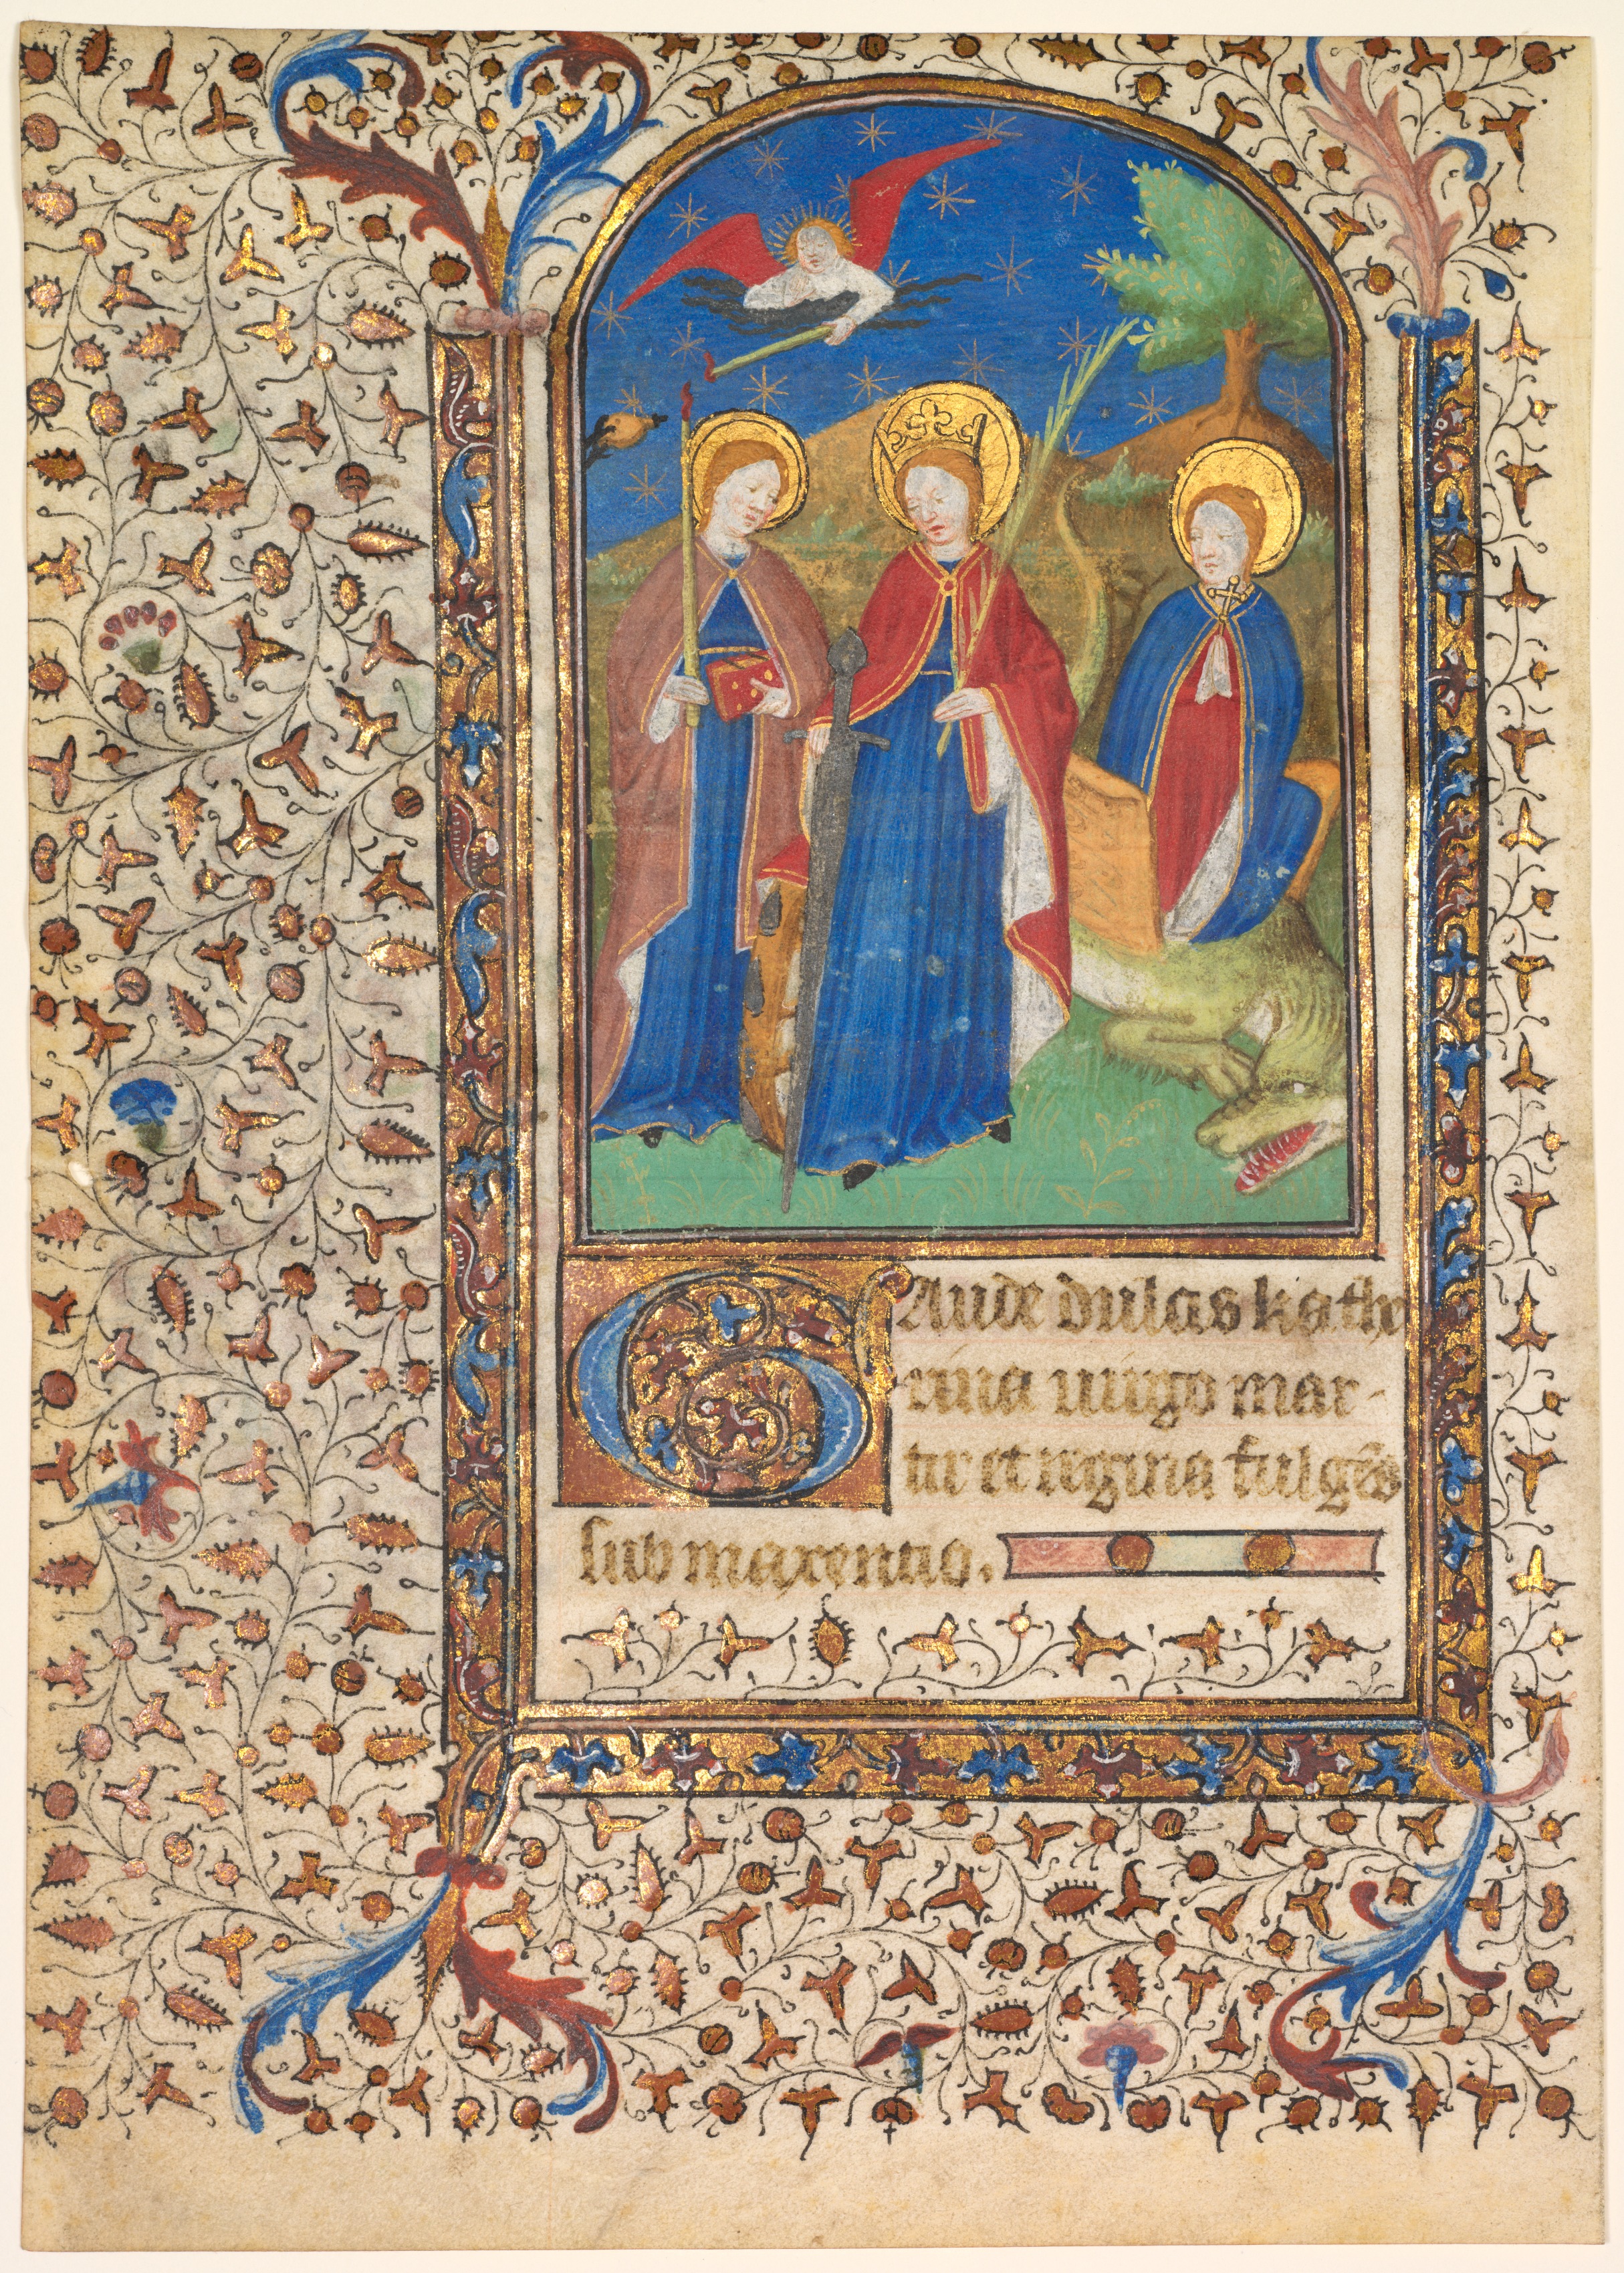 Leaf from a Book of Hours: Sts. Geneviève, Catherine of Alexandria, and Margaret (recto)